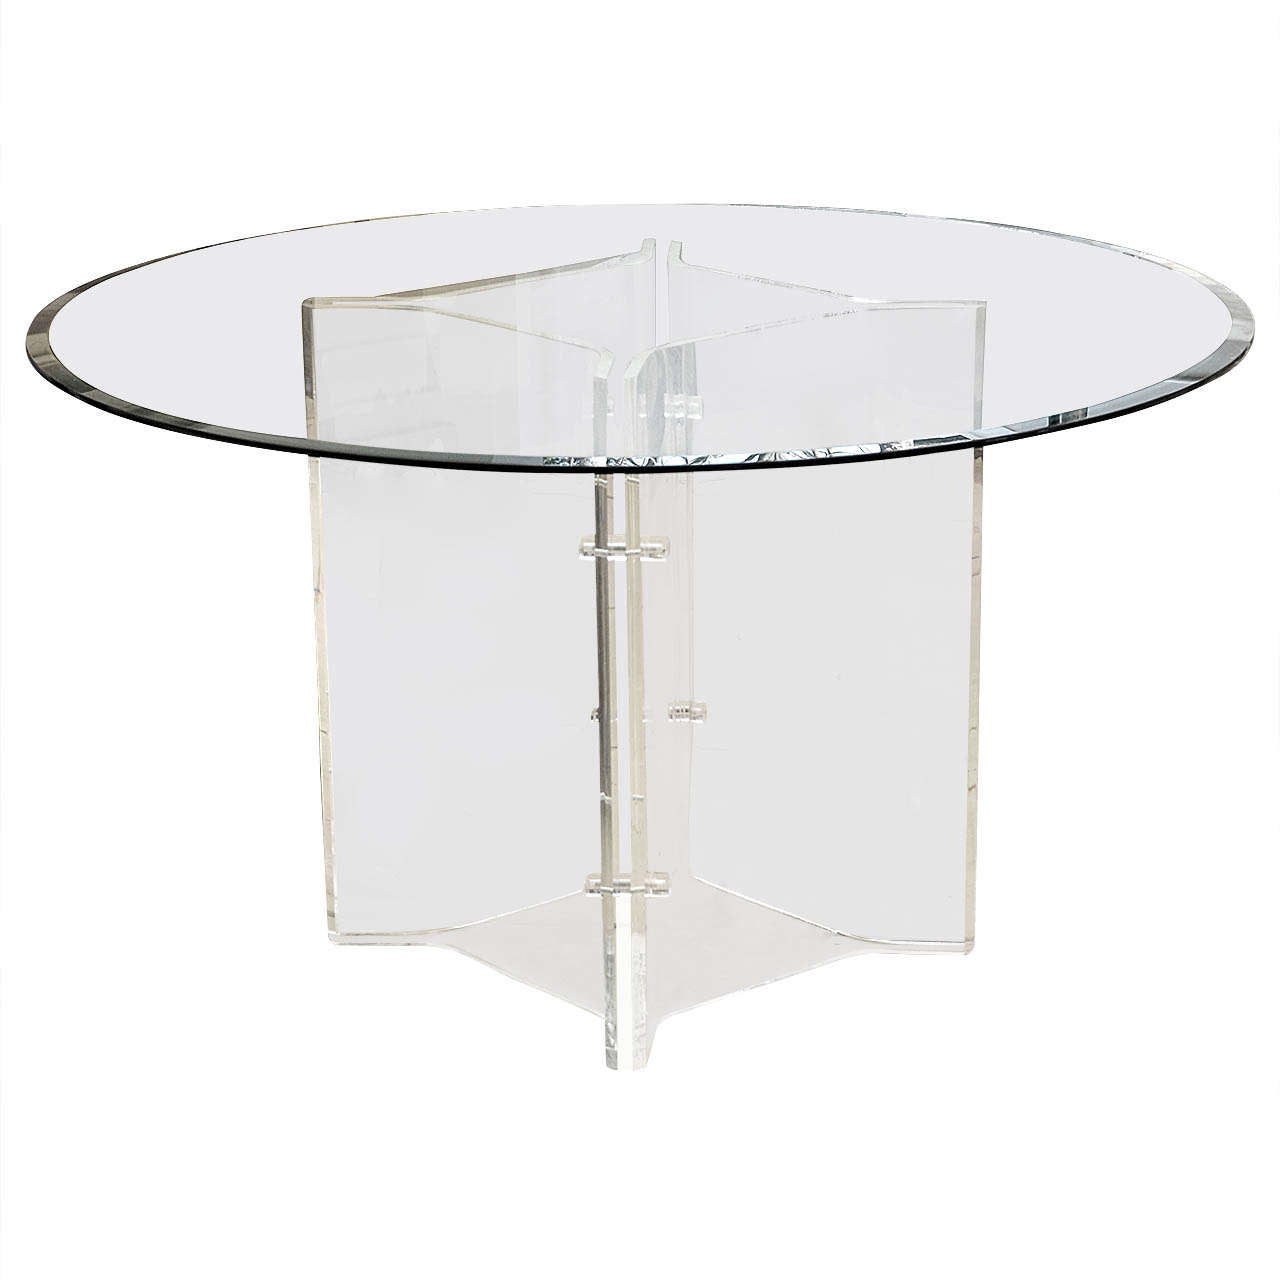 Vintage Lucite Dining/Center Table with Beveled Glass Top